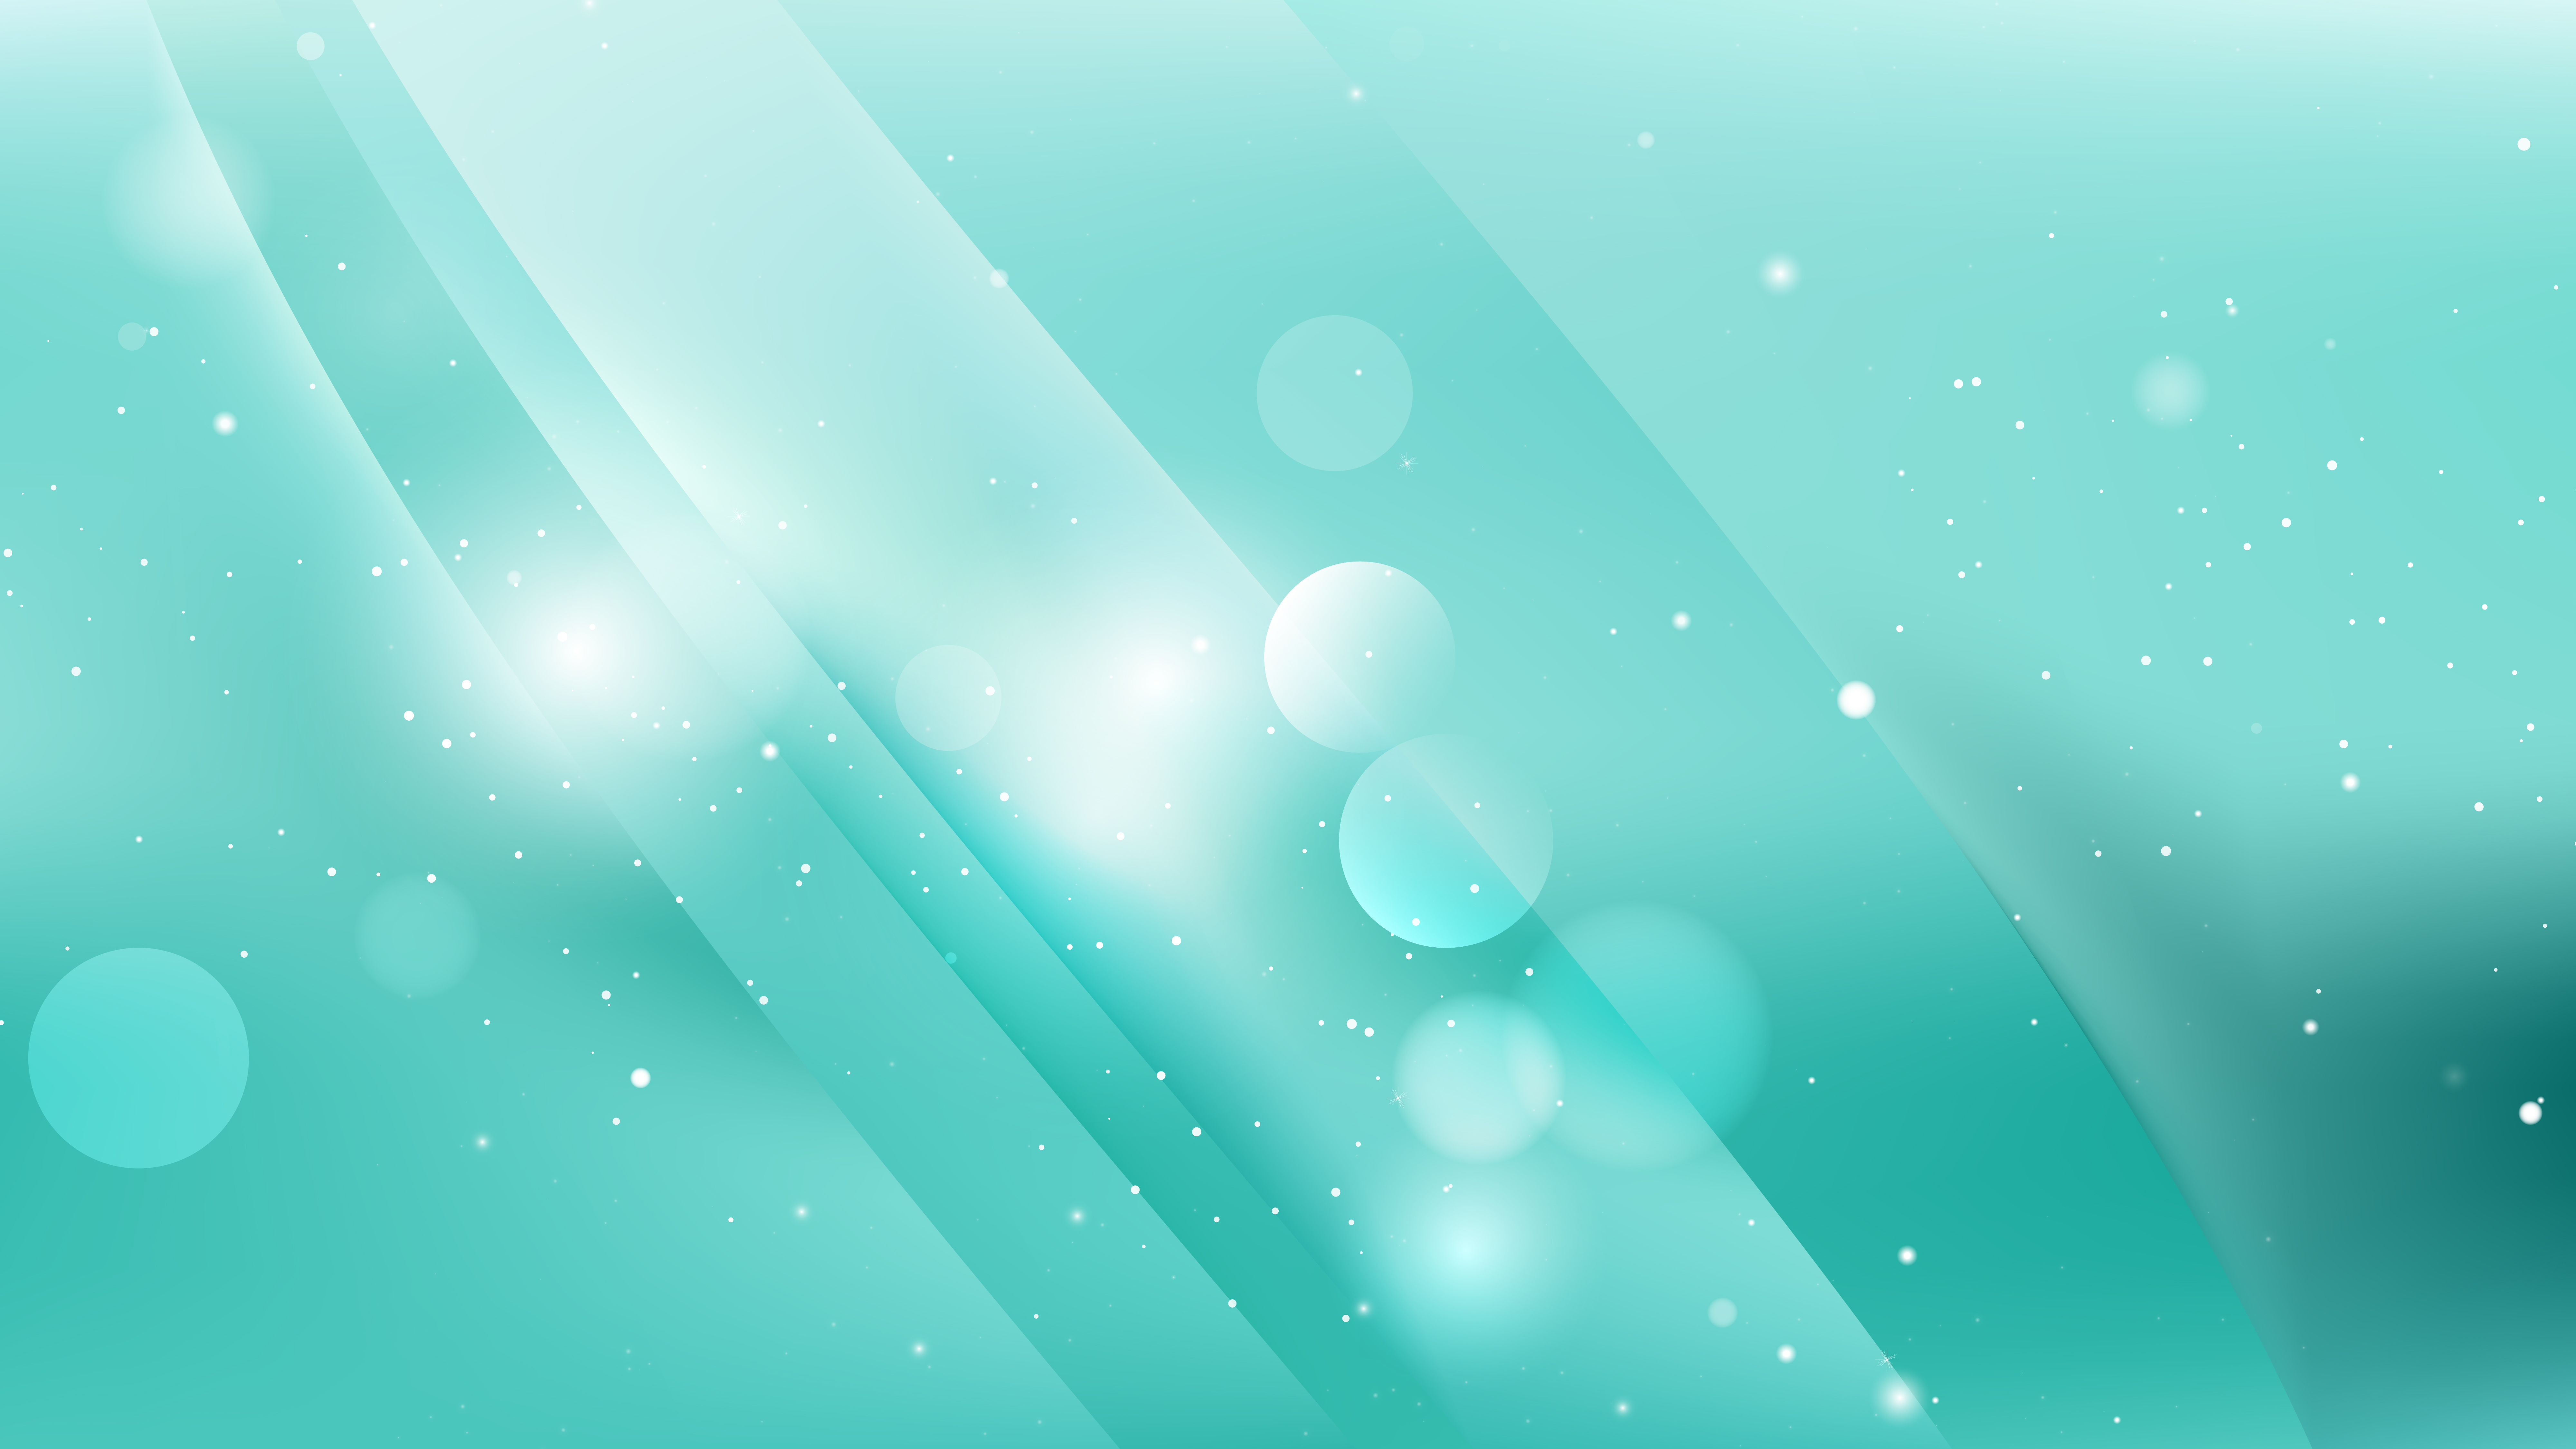 Abstract Mint Green Background - Mint Green Abstract Background